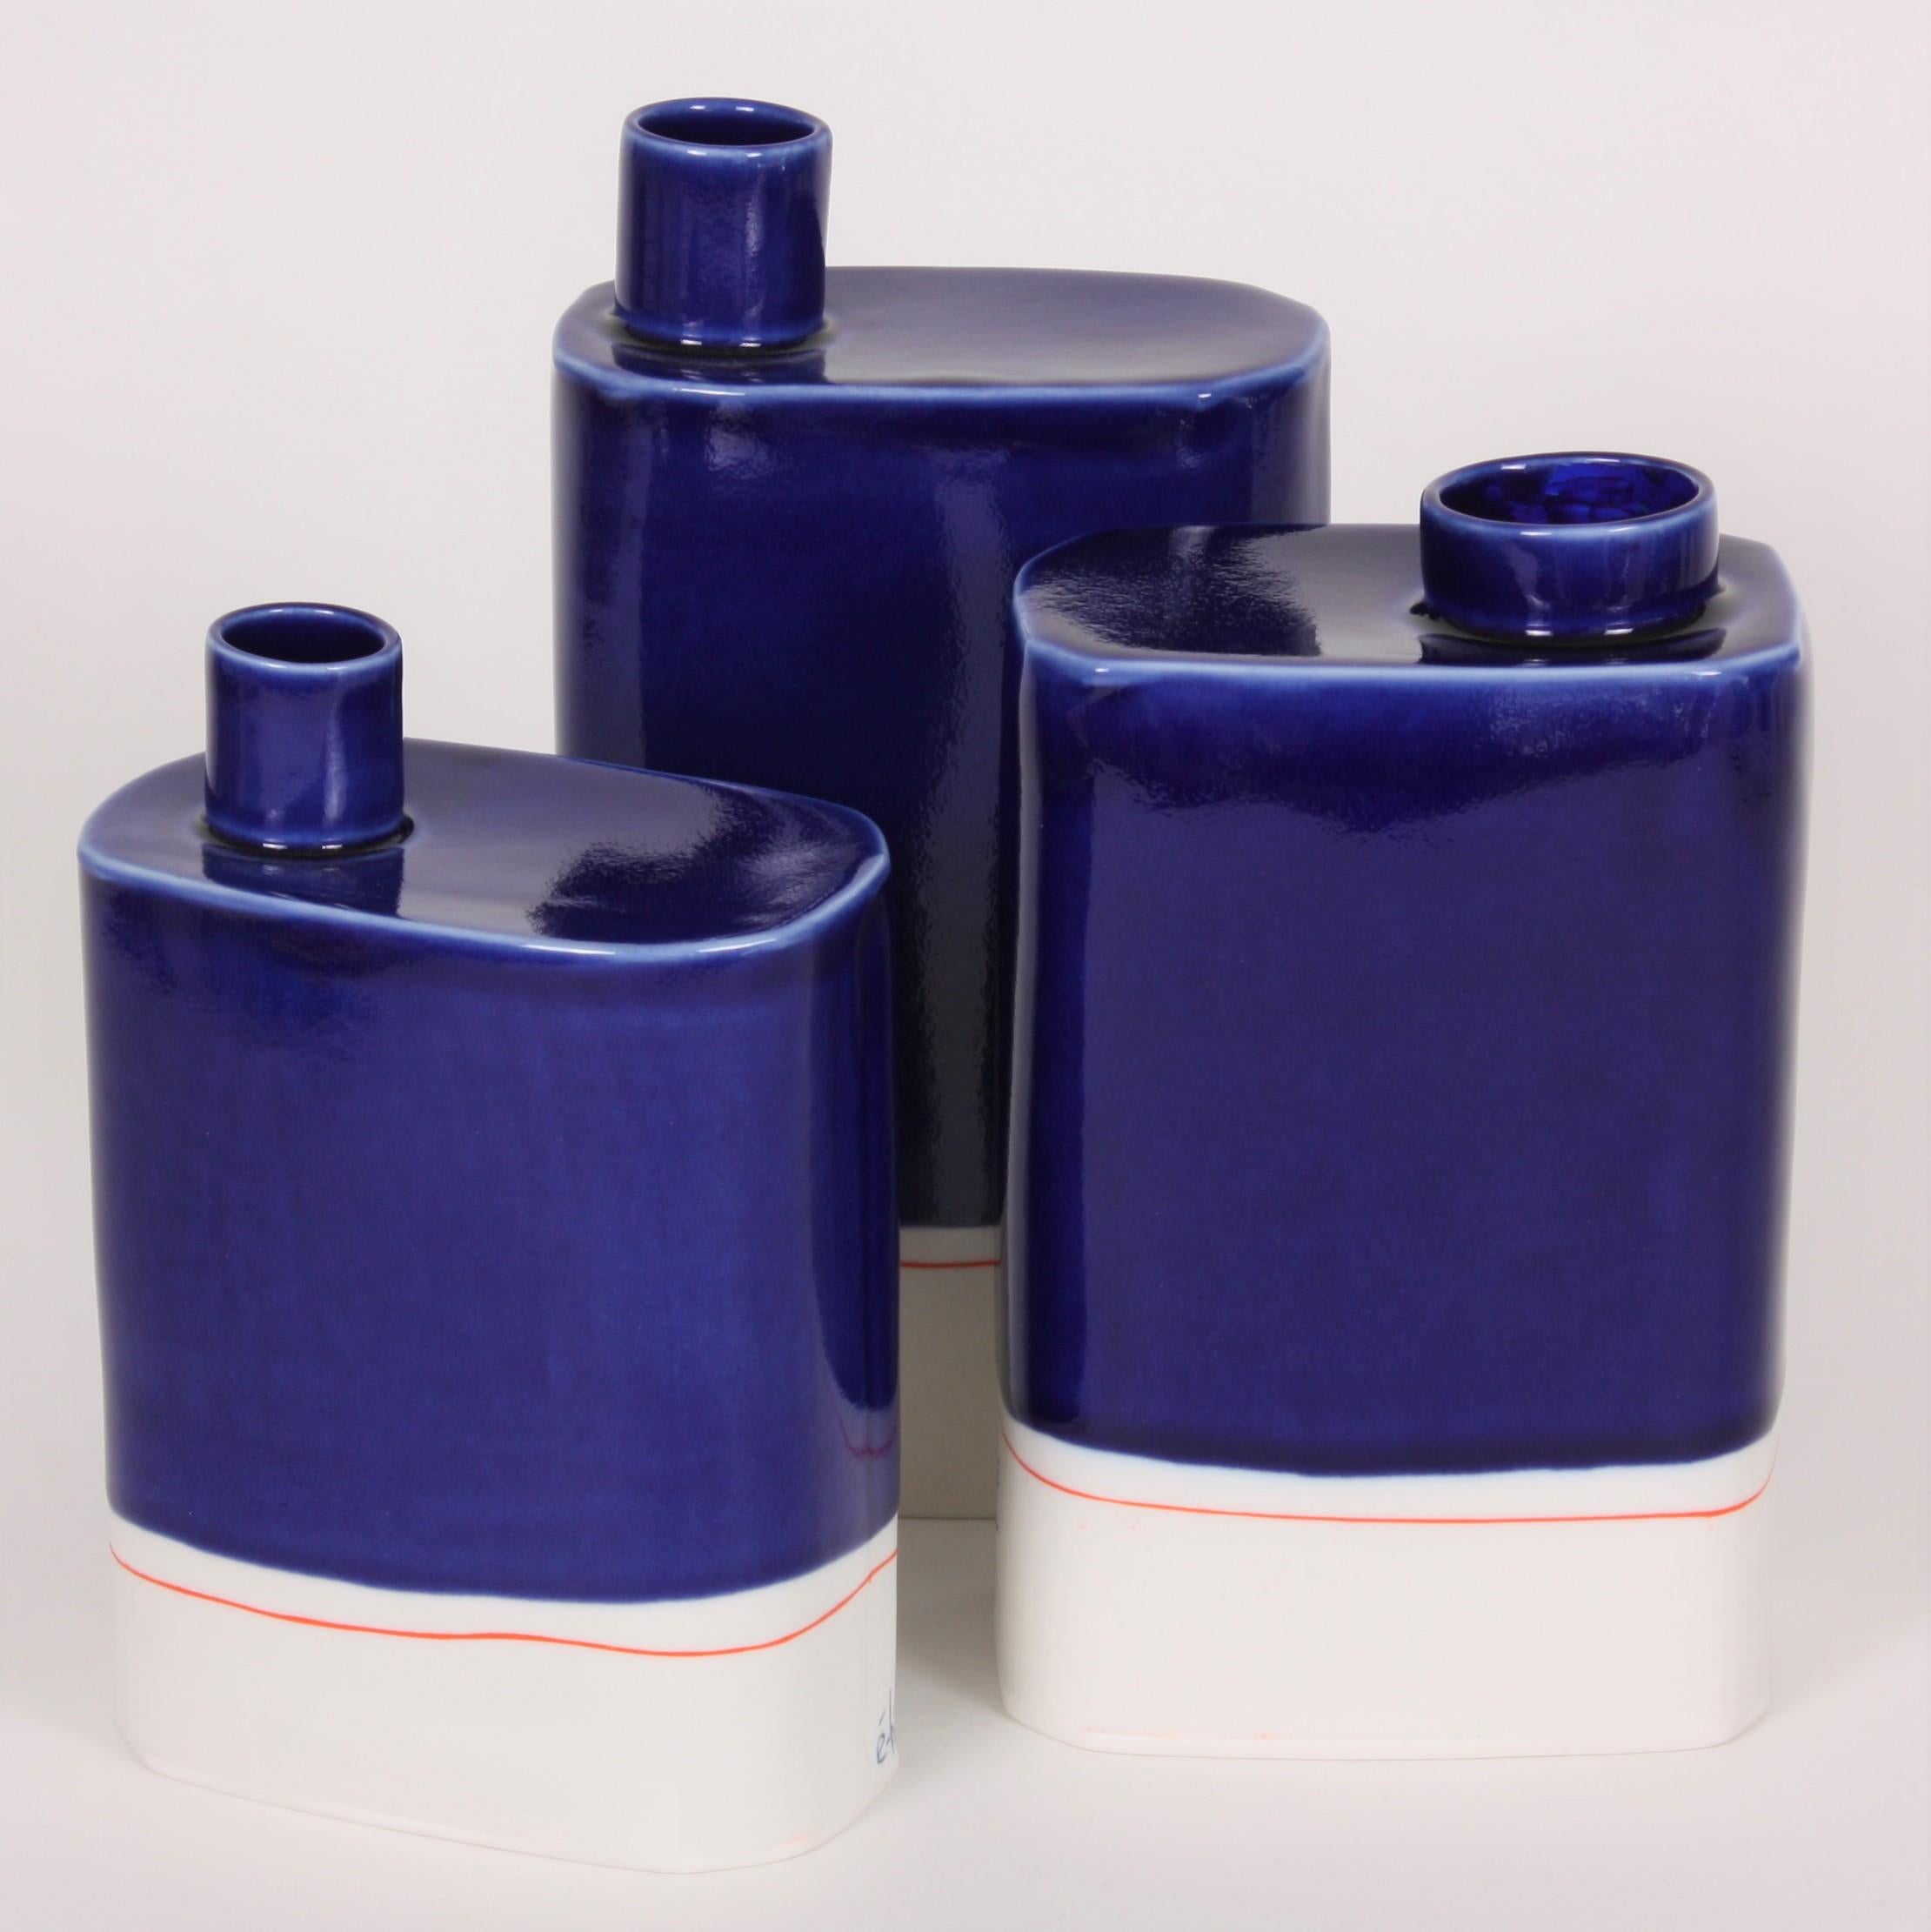 Set of three slab-built porcelain vases in the artist's signature cobalt blue. Well-known French ceramicist Eric Hibelot decorates his porcelain vessels with bold primary colors, in the pop art tradition. The artist sublimates today’s consumer